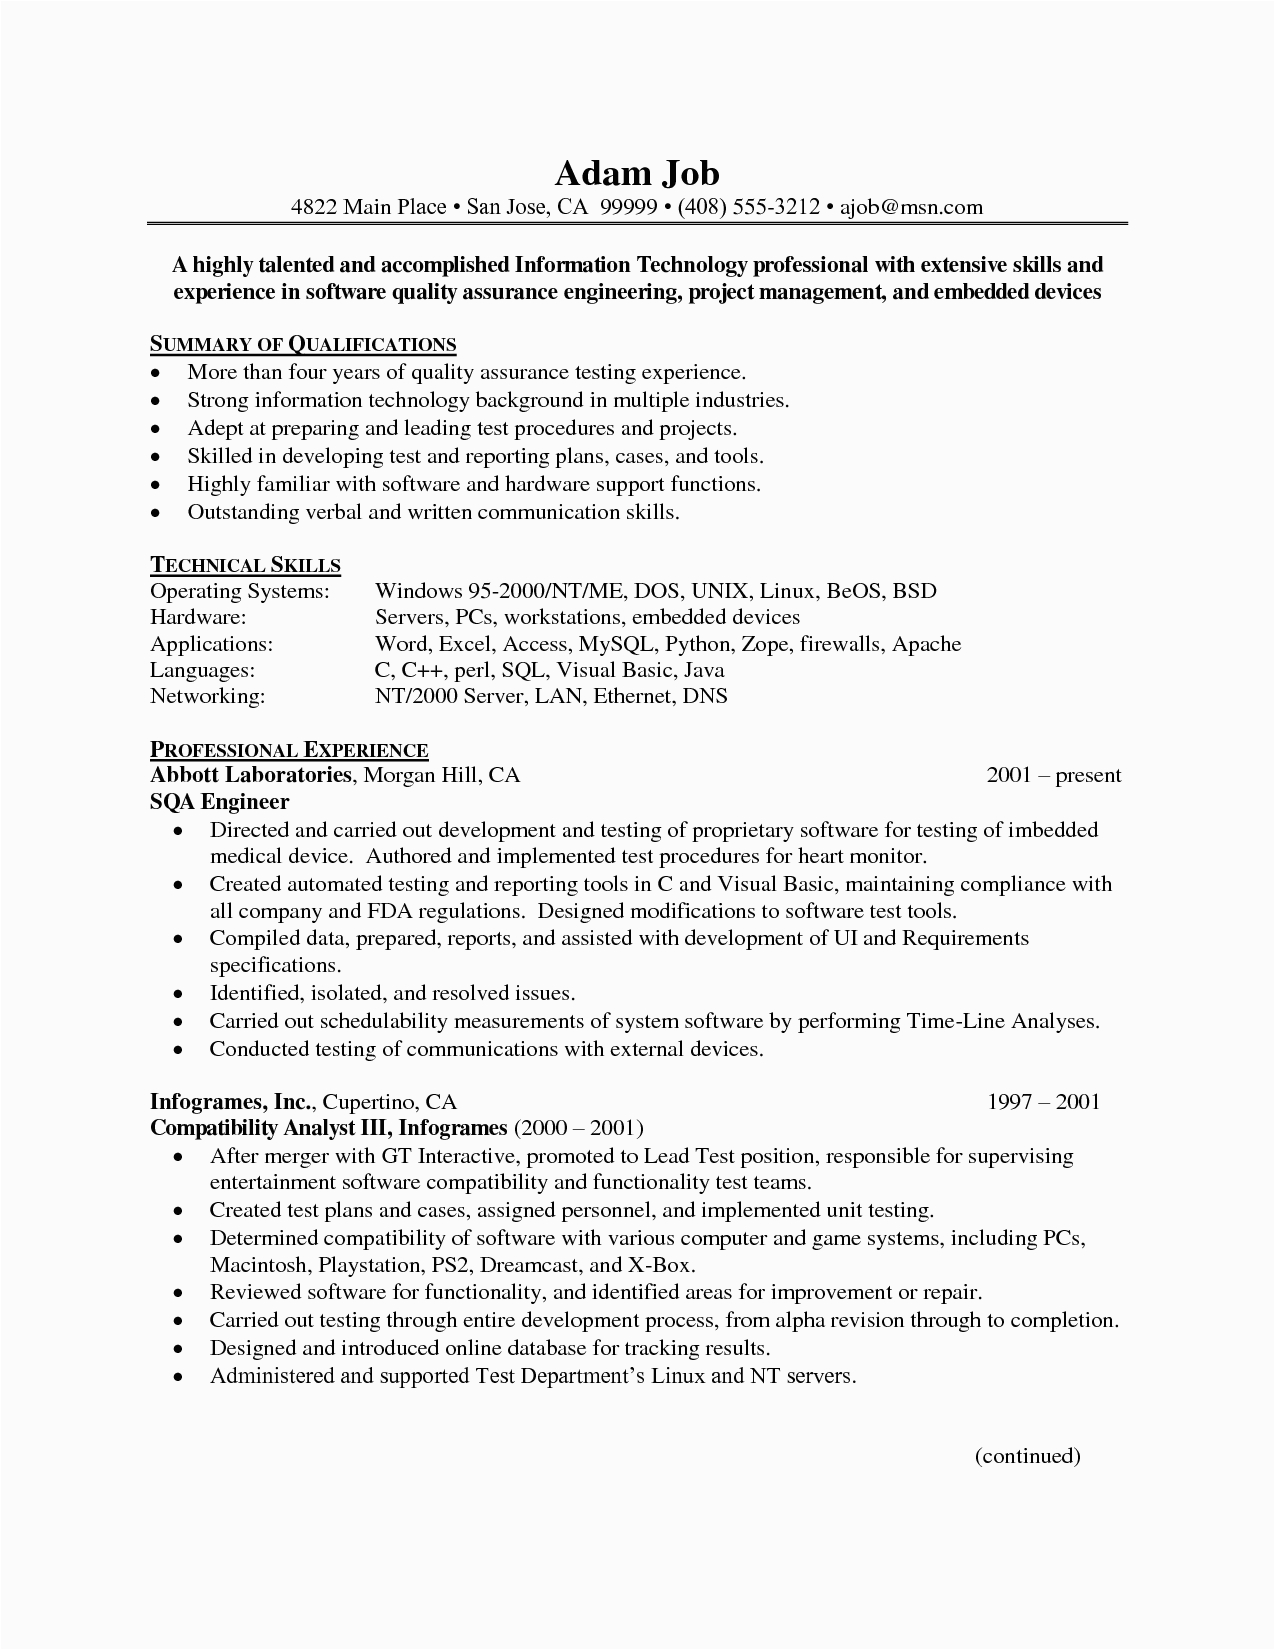 Sample Resume for Experienced Quality Control Engineer Resume format Quality Engineer Resume format